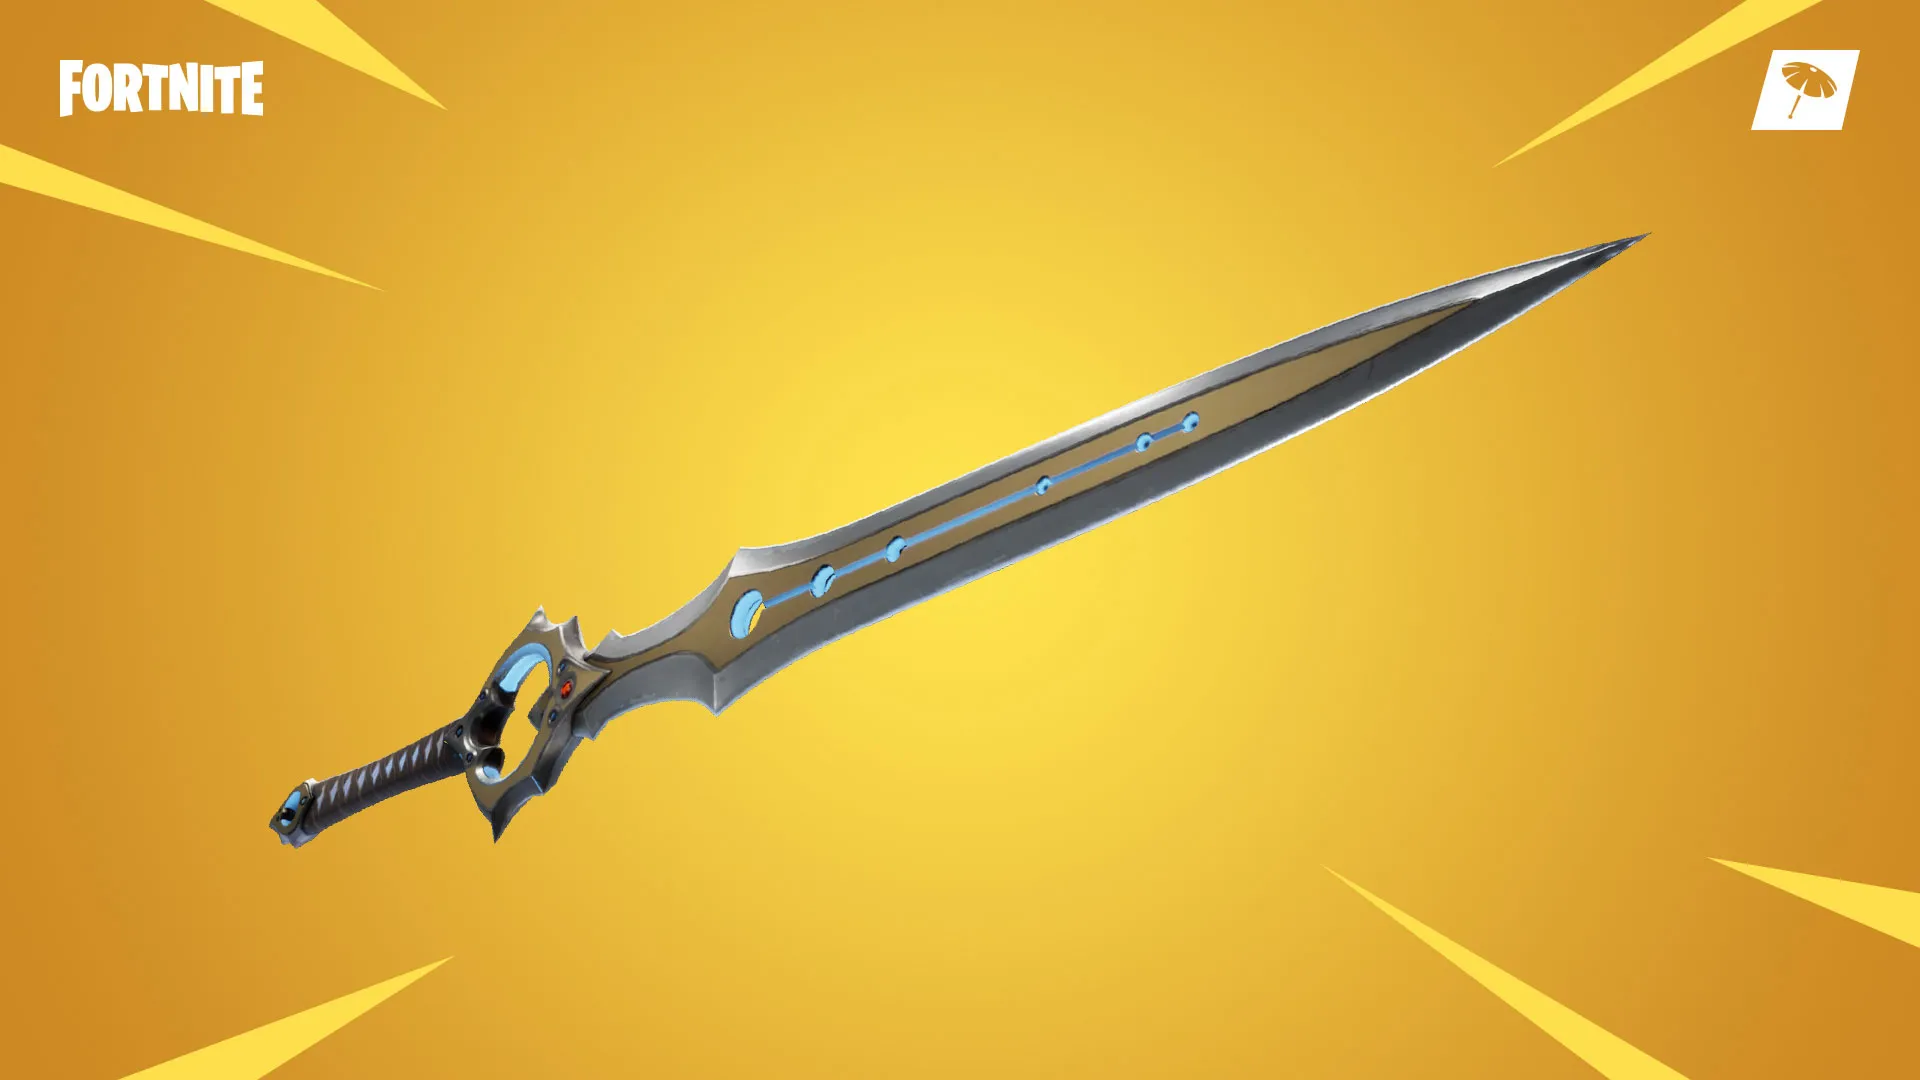 Fortnite Infinity Blade Guide Sword Where To Find How To Use Damage Tips Tricks Pro Game Guides - thanos gauntlet test roblox